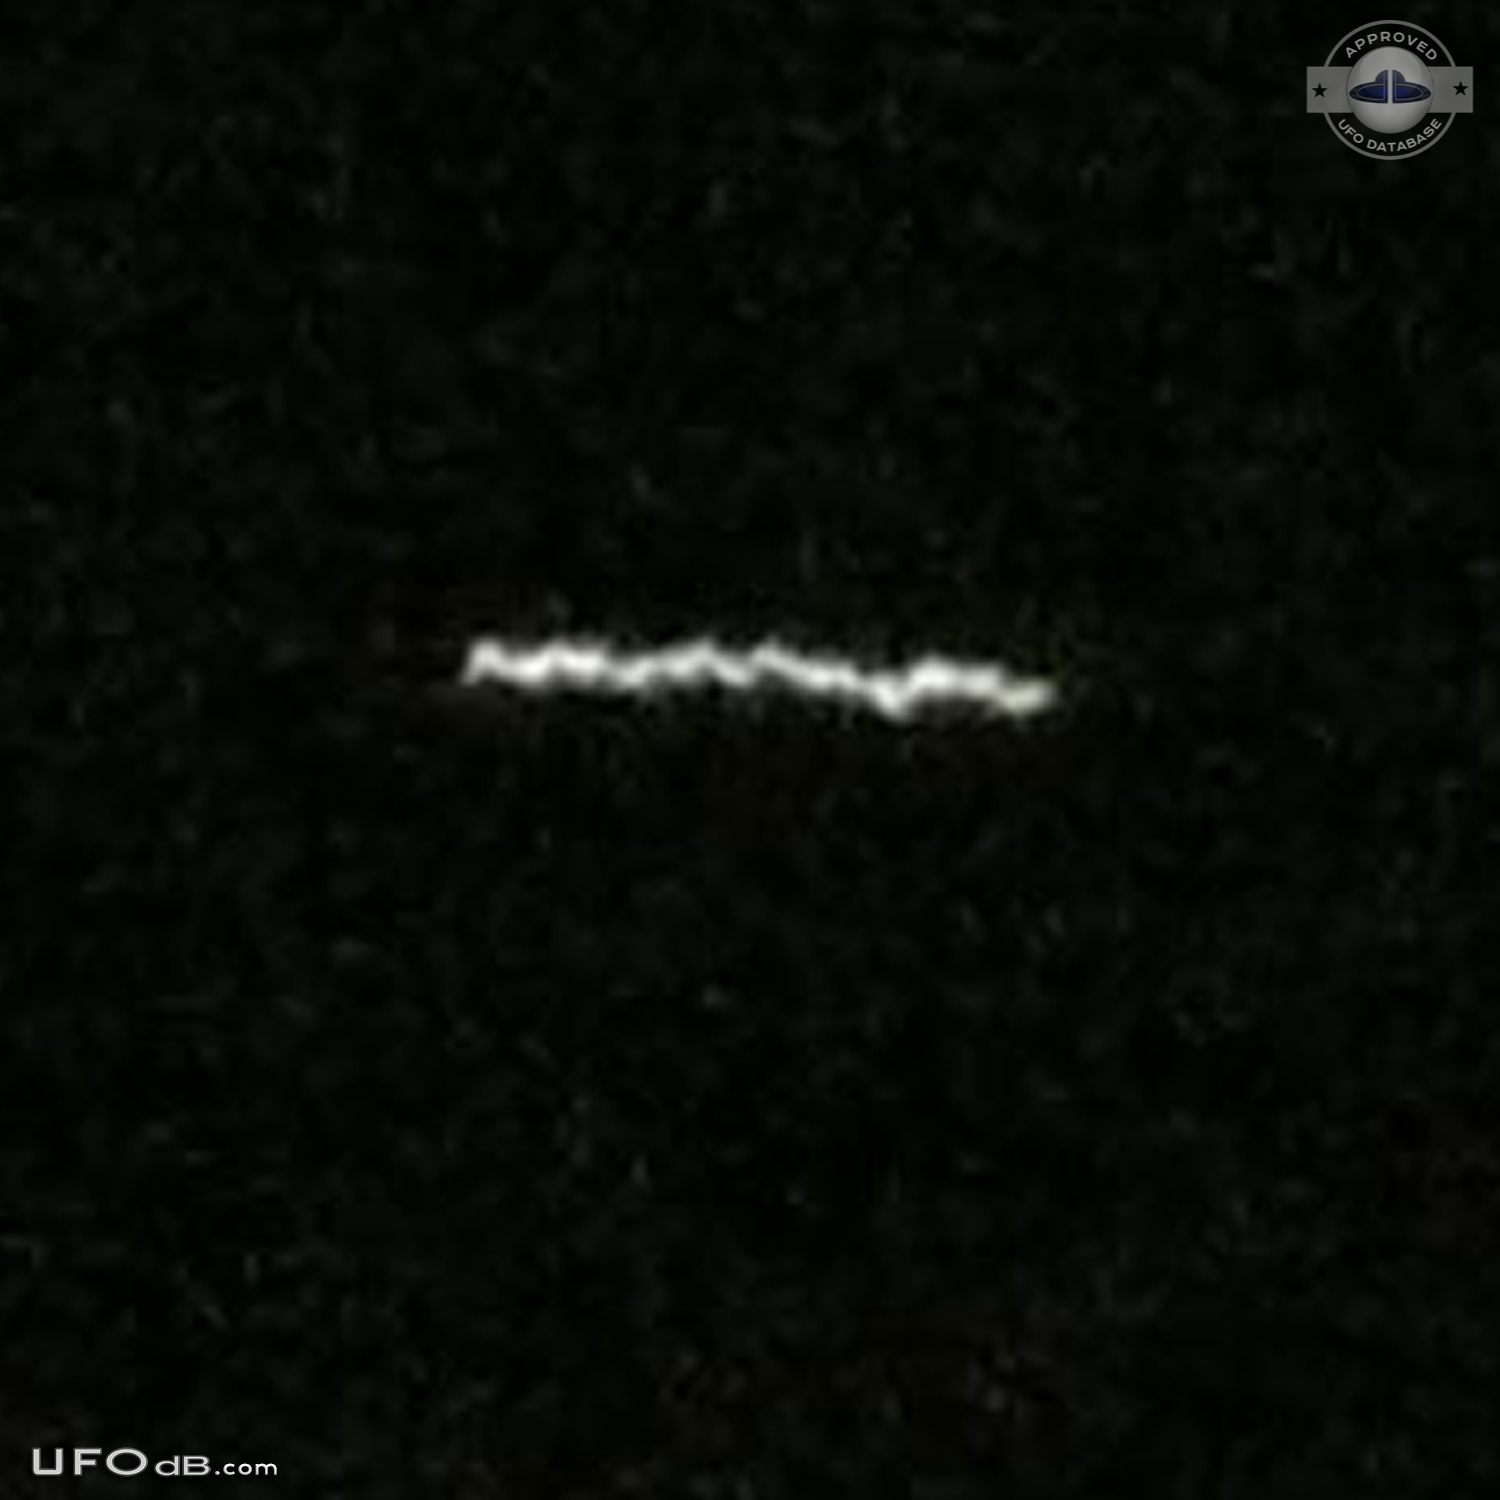 Straight line of white light UFO changing direction over Chichen Itza UFO Picture #635-2